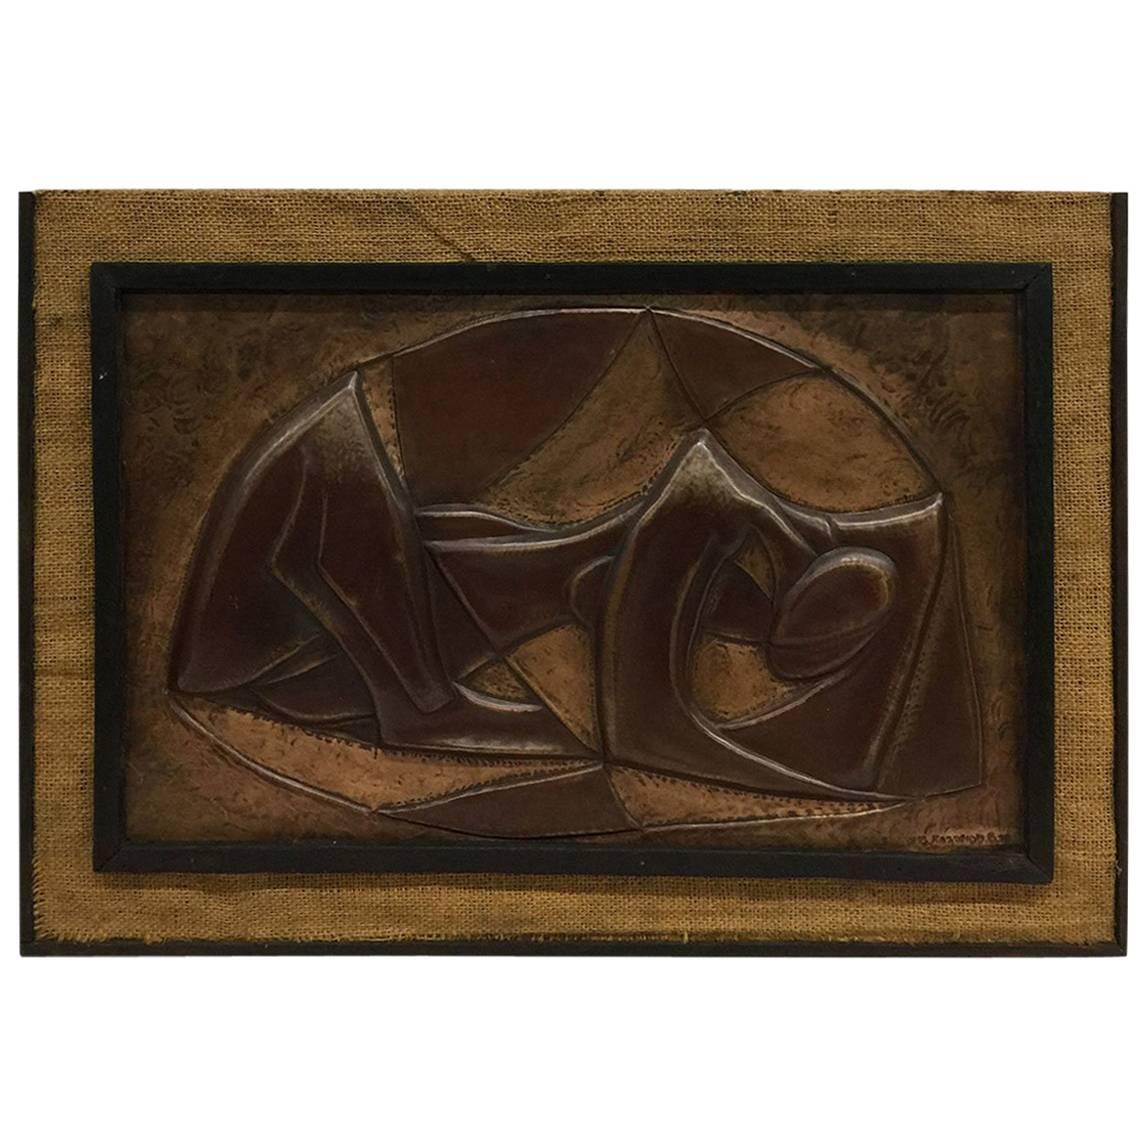 African Art by MB Kasongo Banza Meso, L'Angoisse II, Brass Relief, 1977